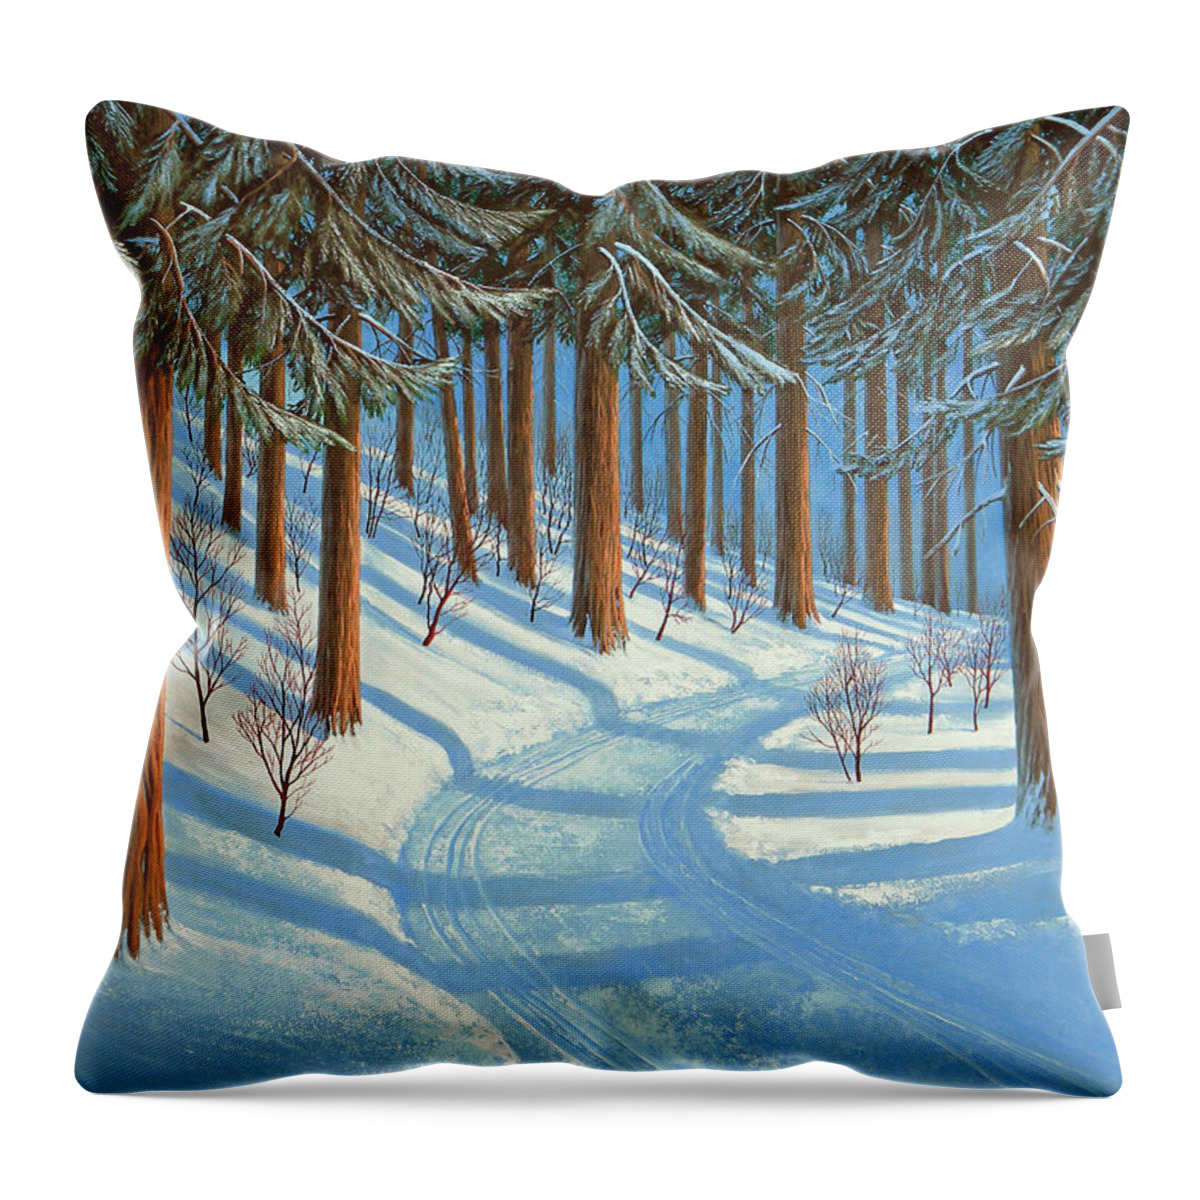 Tahoe Throw Pillow featuring the painting Tahoe Forest In Winter by Frank Wilson